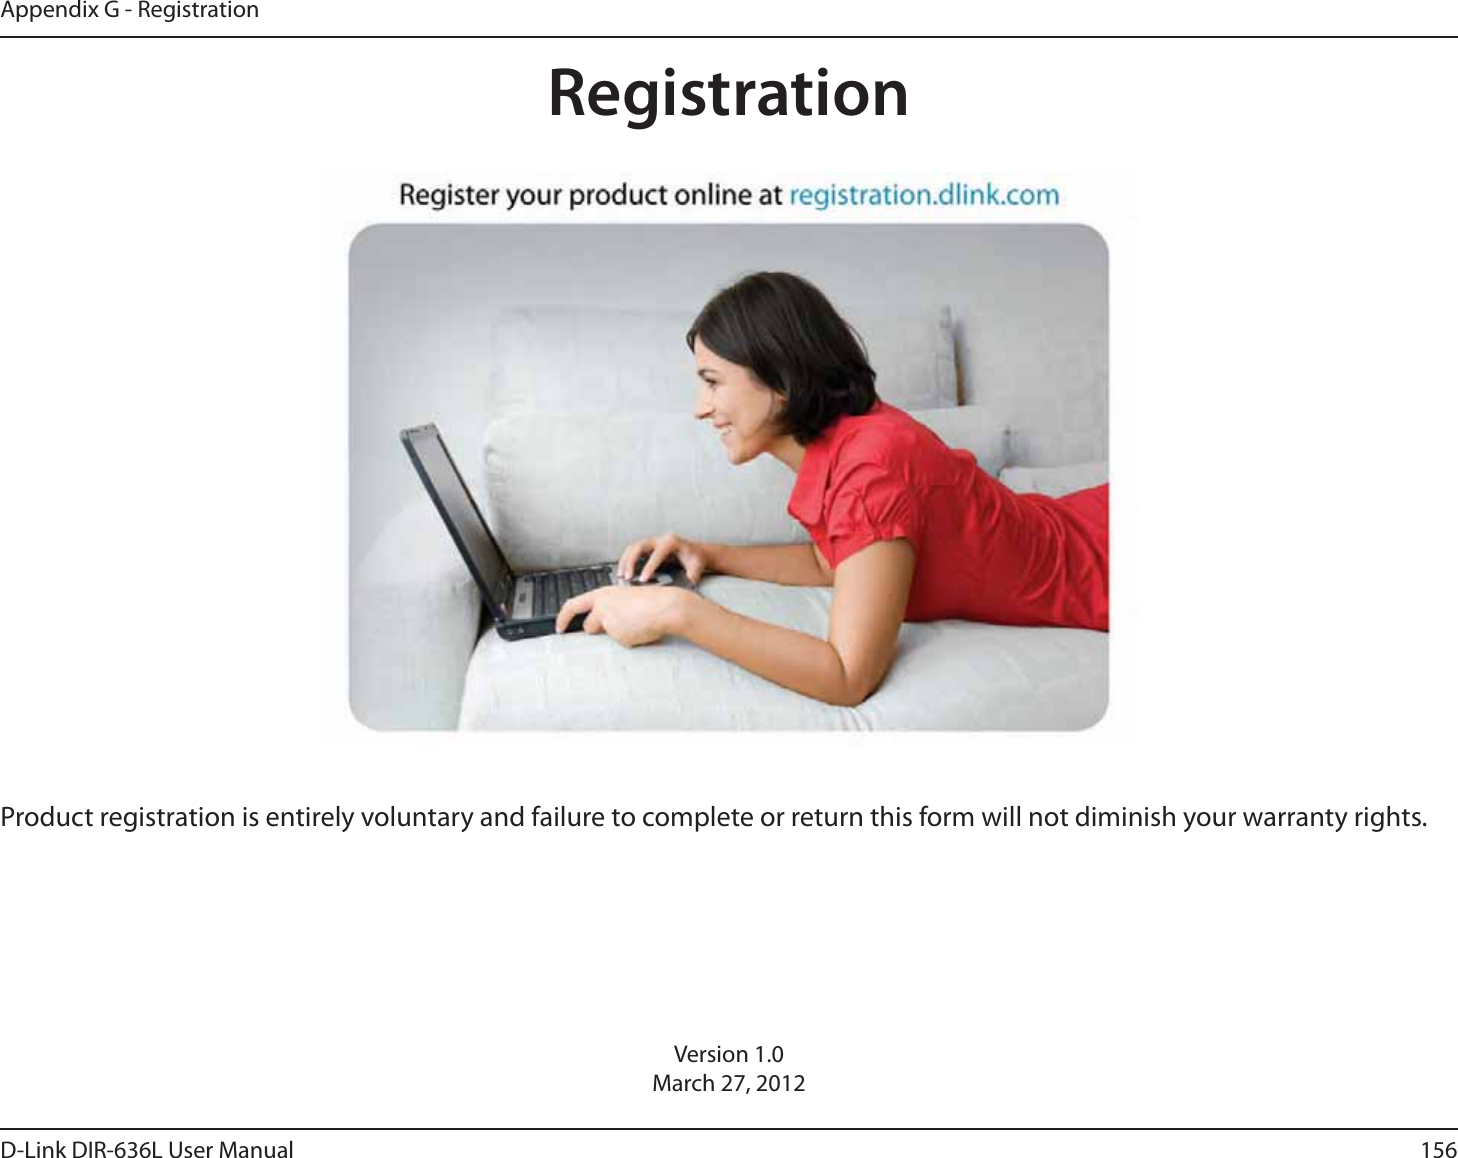 156D-Link DIR-636L User ManualAppendix G - RegistrationVersion 1.0March 27, 2012Product registration is entirely voluntary and failure to complete or return this form will not diminish your warranty rights.Registration